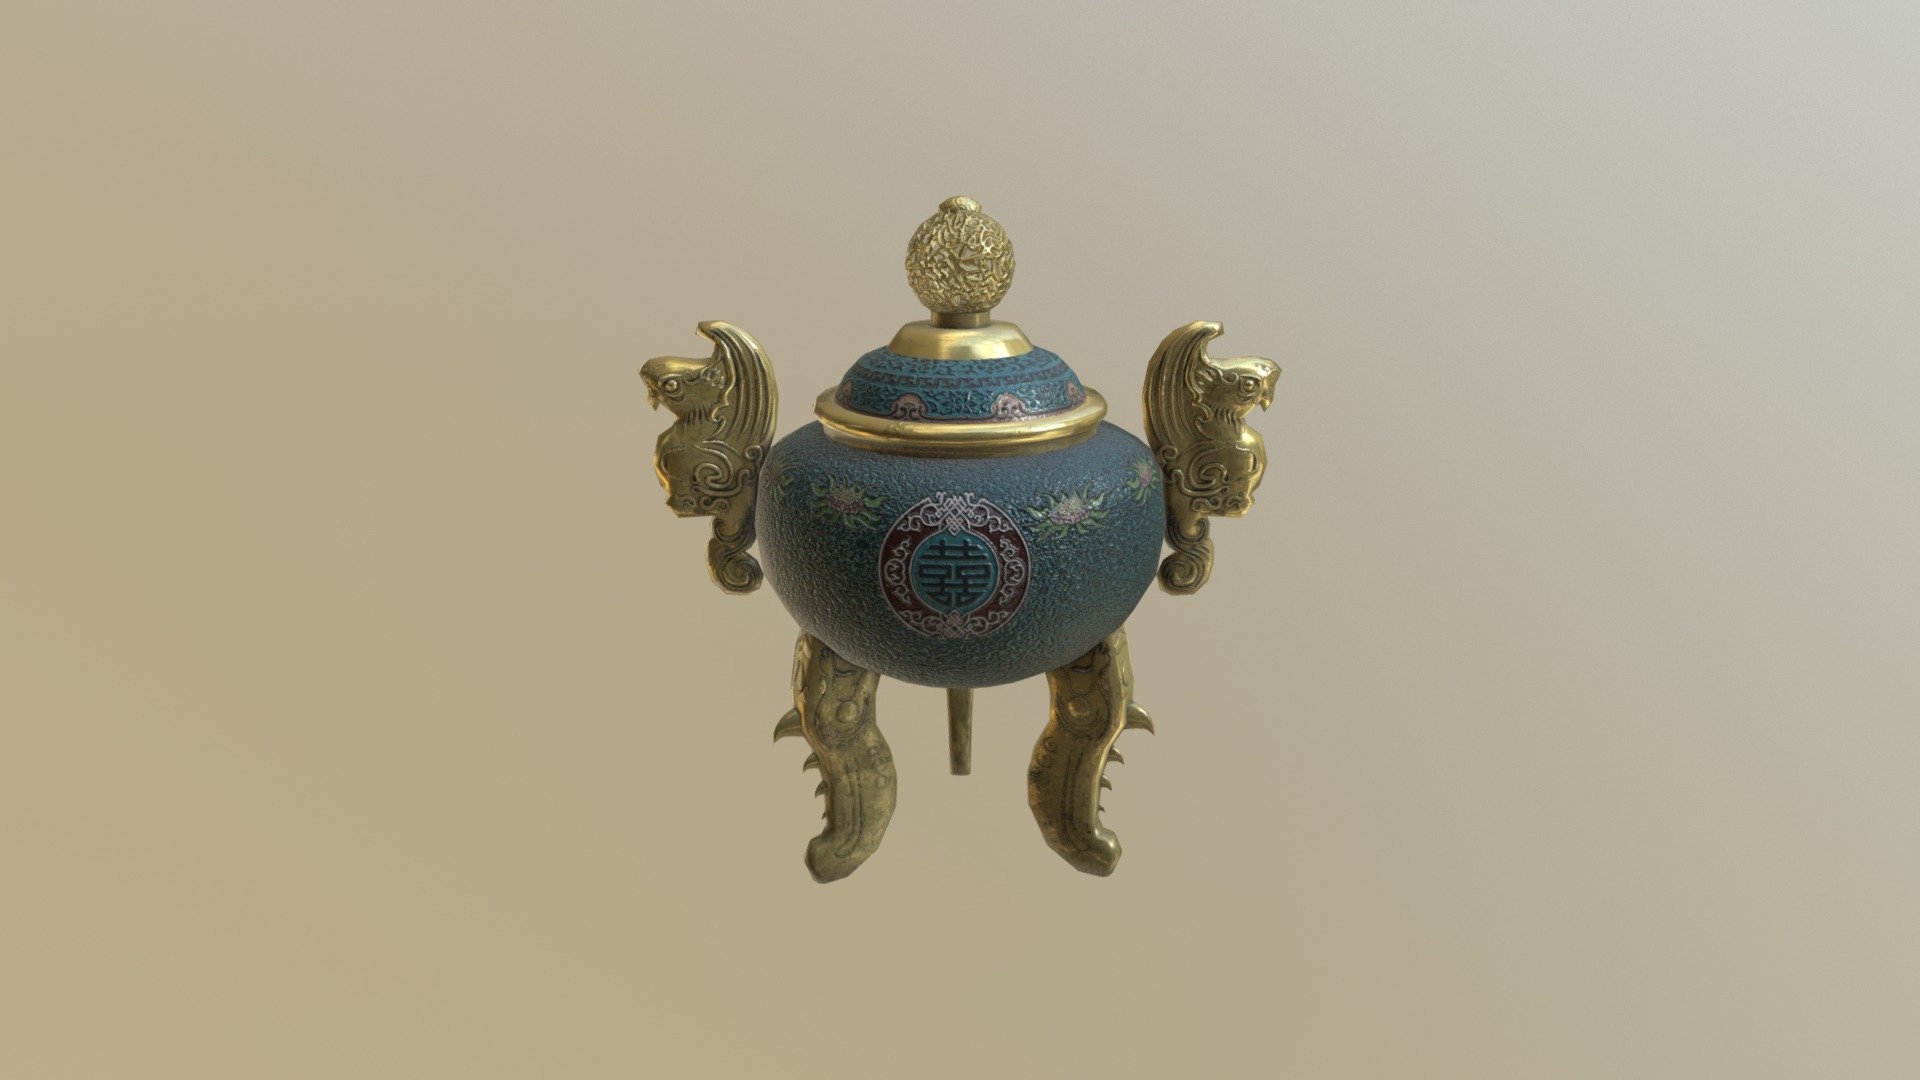 Asset made for unreleased game - Chinese vase - 3D model by wolfka 3d model